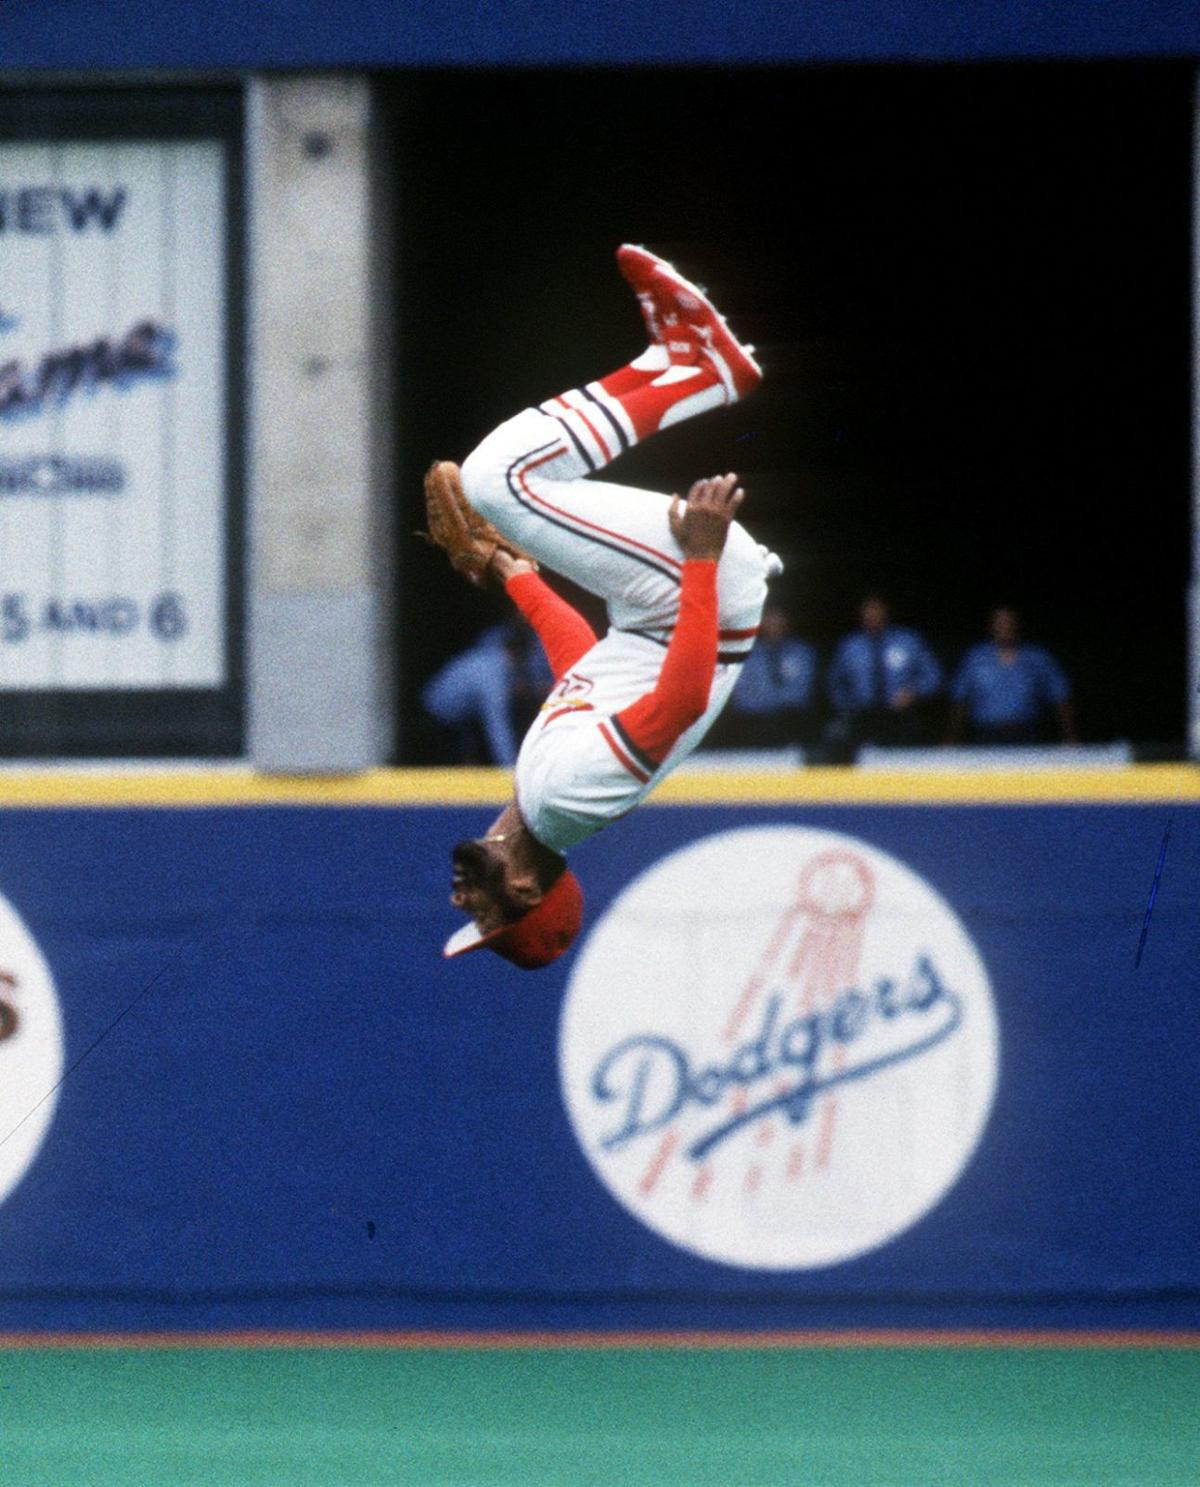 Baseball In Pics on X: Ozzie Smith doing a back flip before a